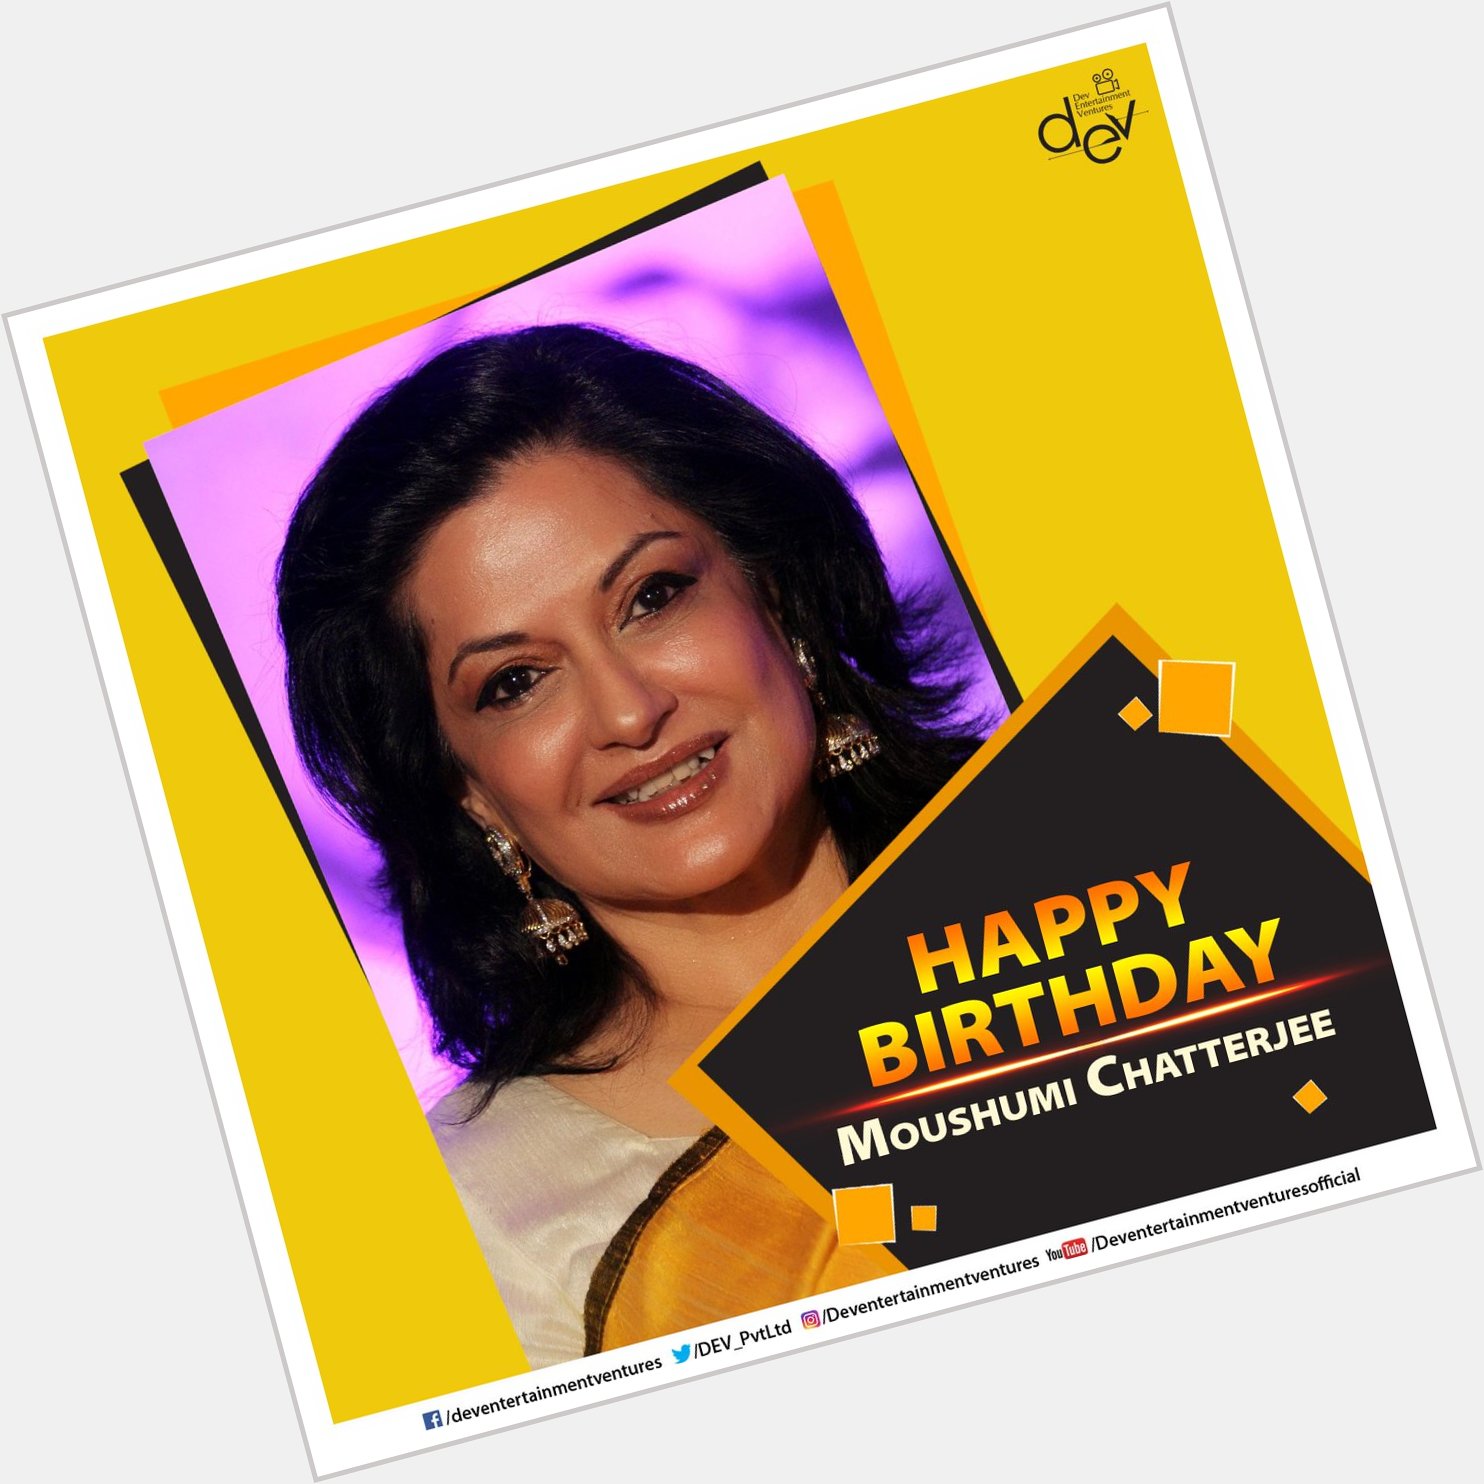 Beauty & Charm never fades for our evergreen actress. Happy Birthday Moushumi Chatterjee. 